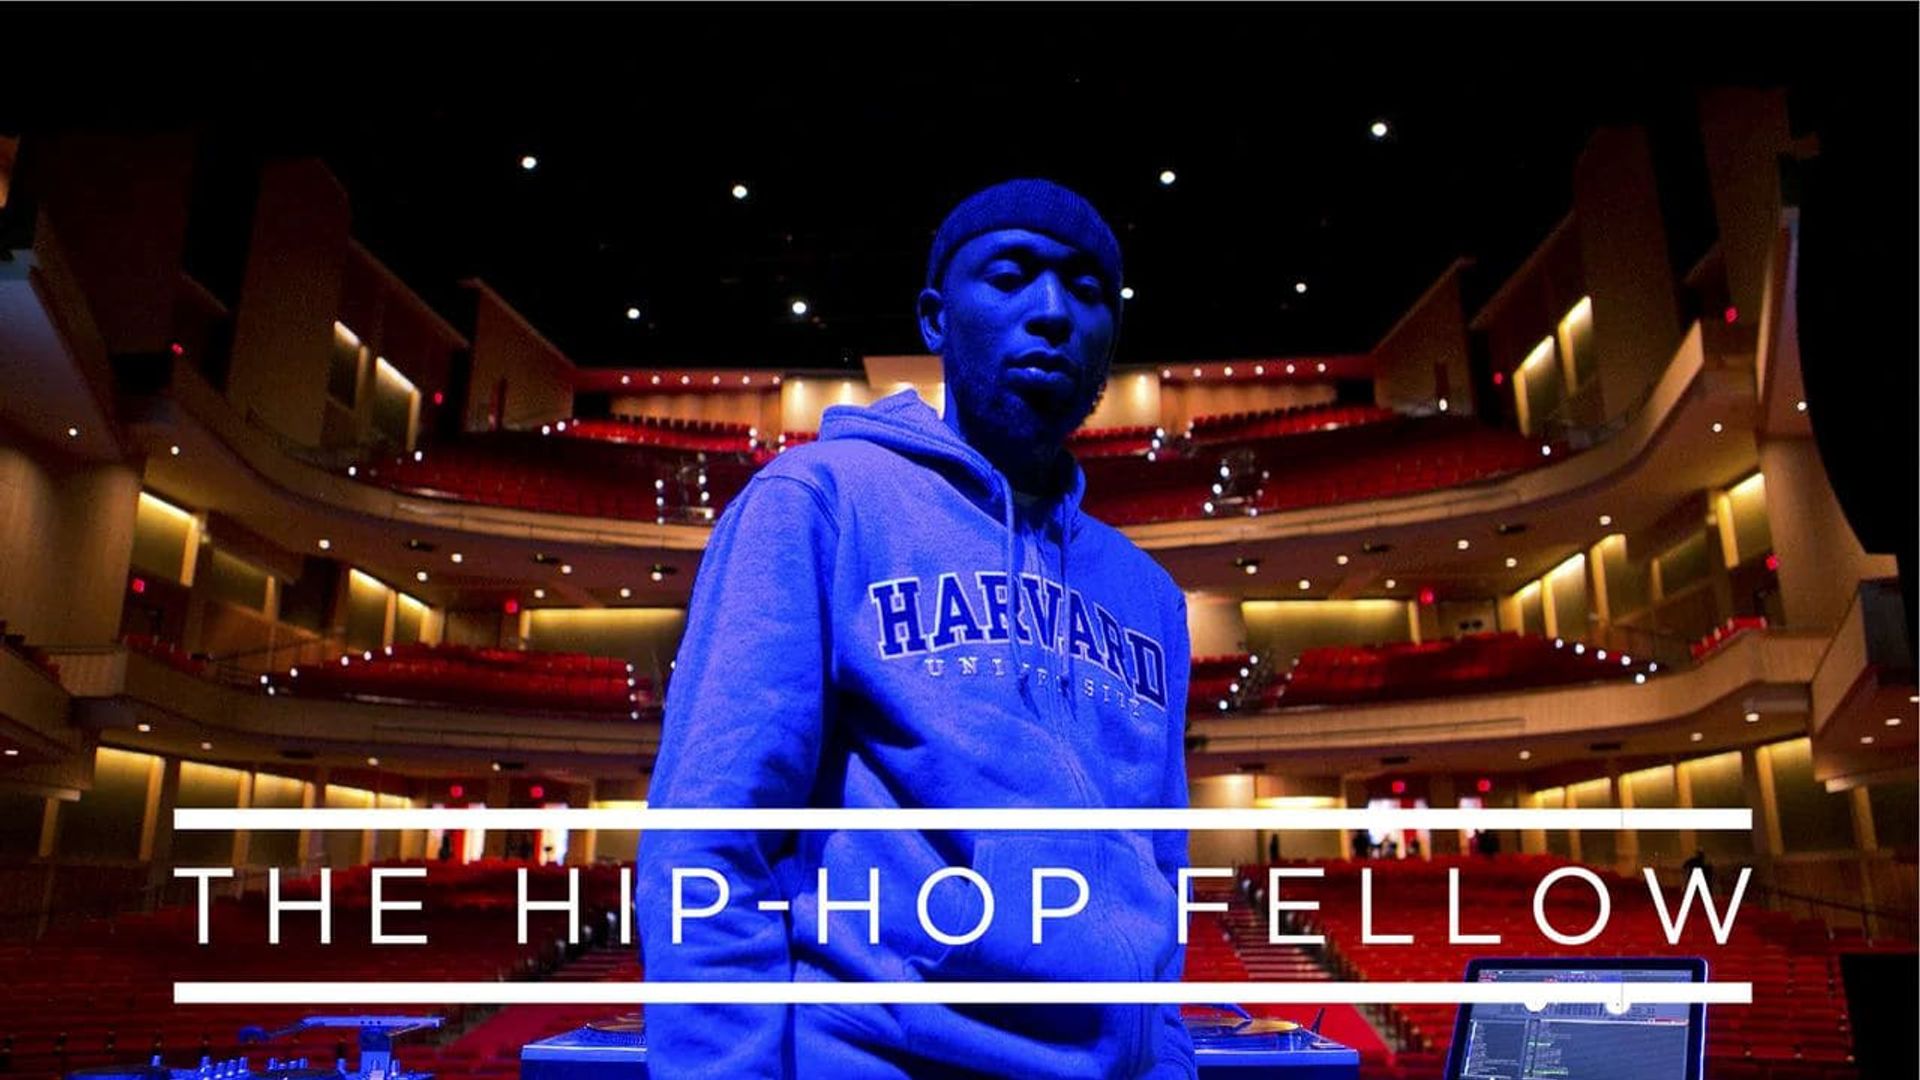 The Hip-Hop Fellow background